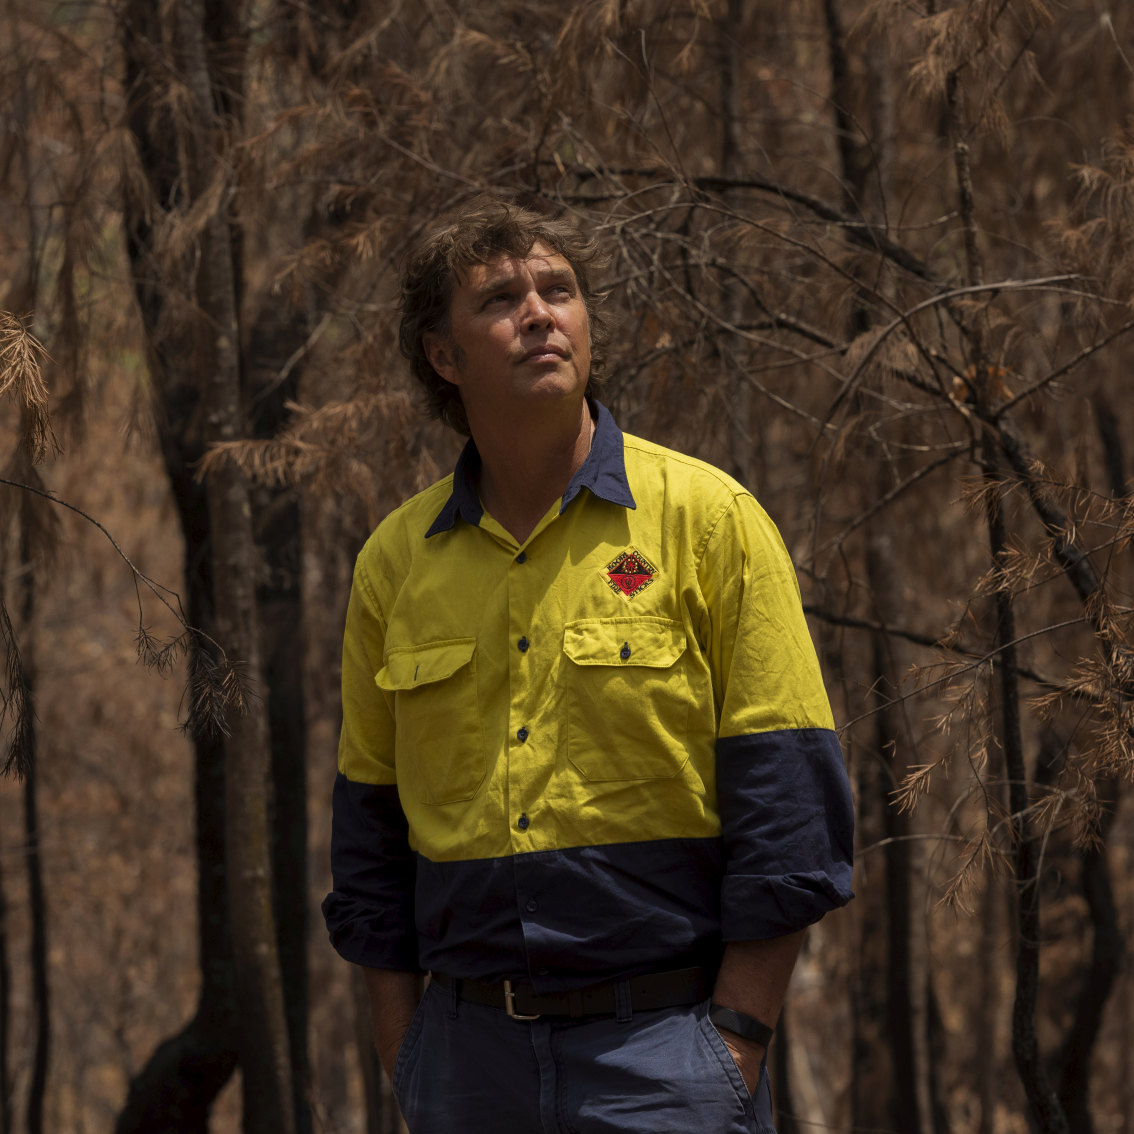 Dennis Barber says properties across NSW and Australia could benefit from cultural burning. 